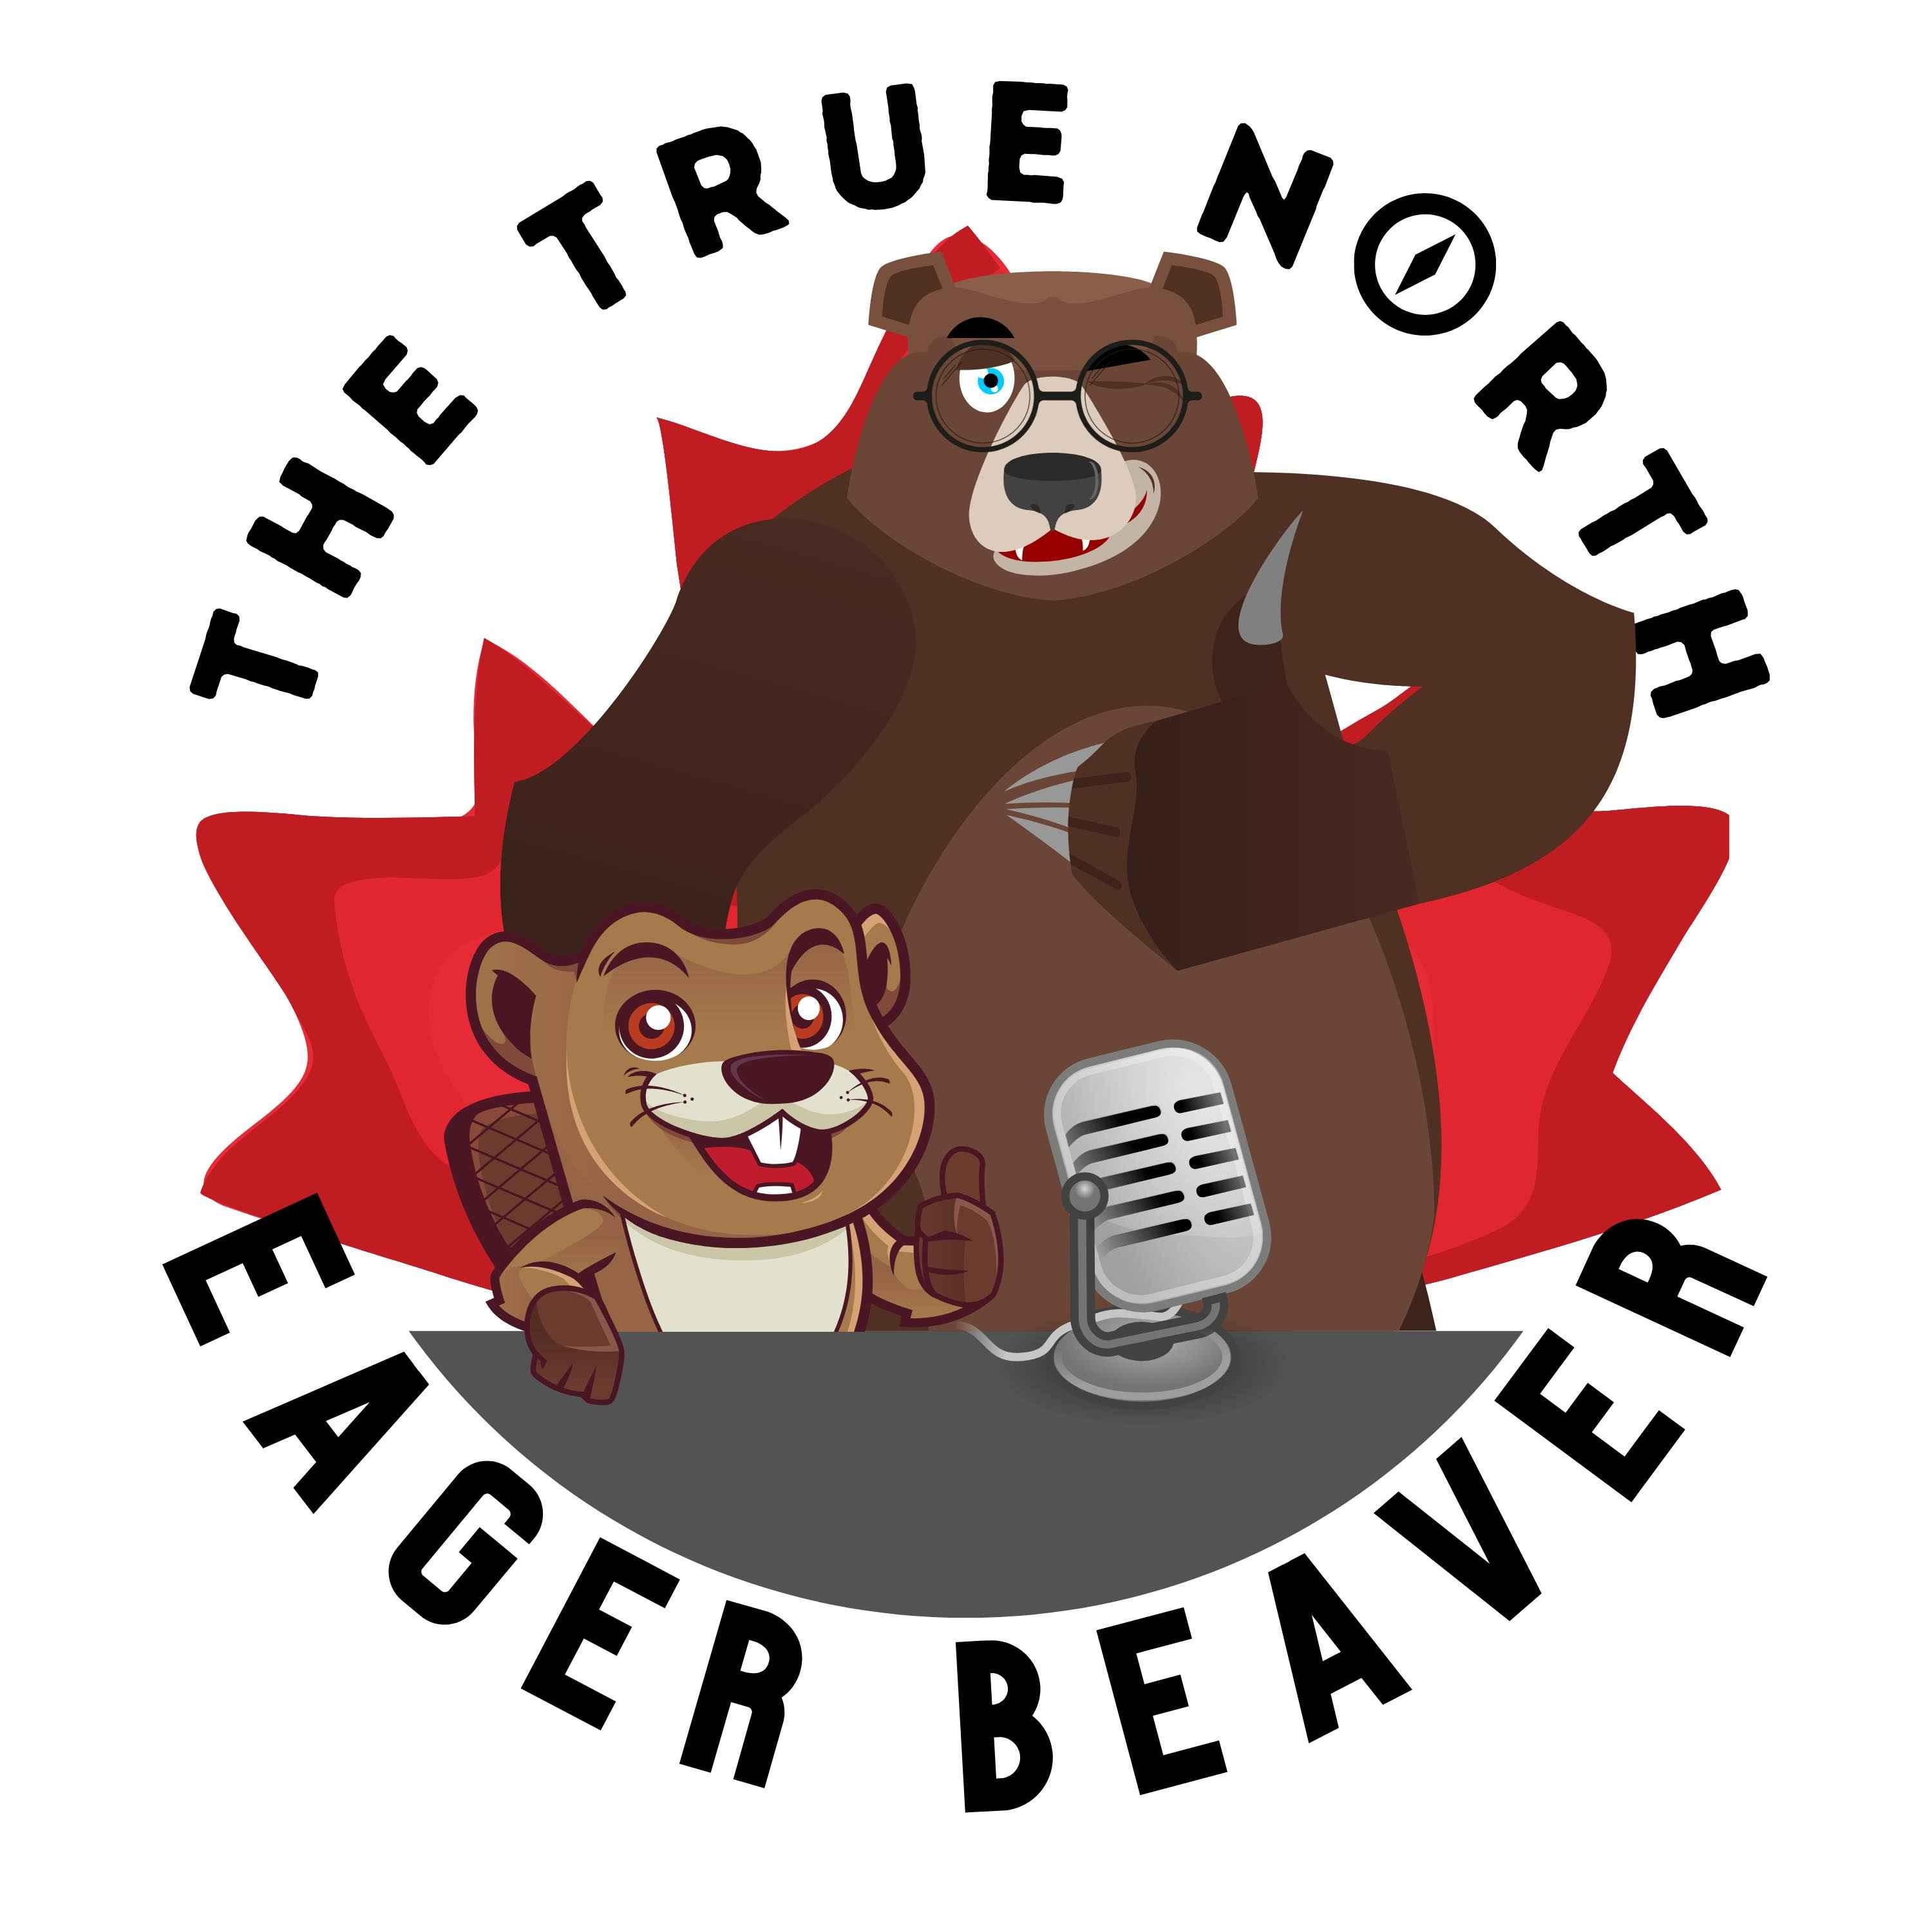 Red Alert! – The Daily Beaver Morning Show